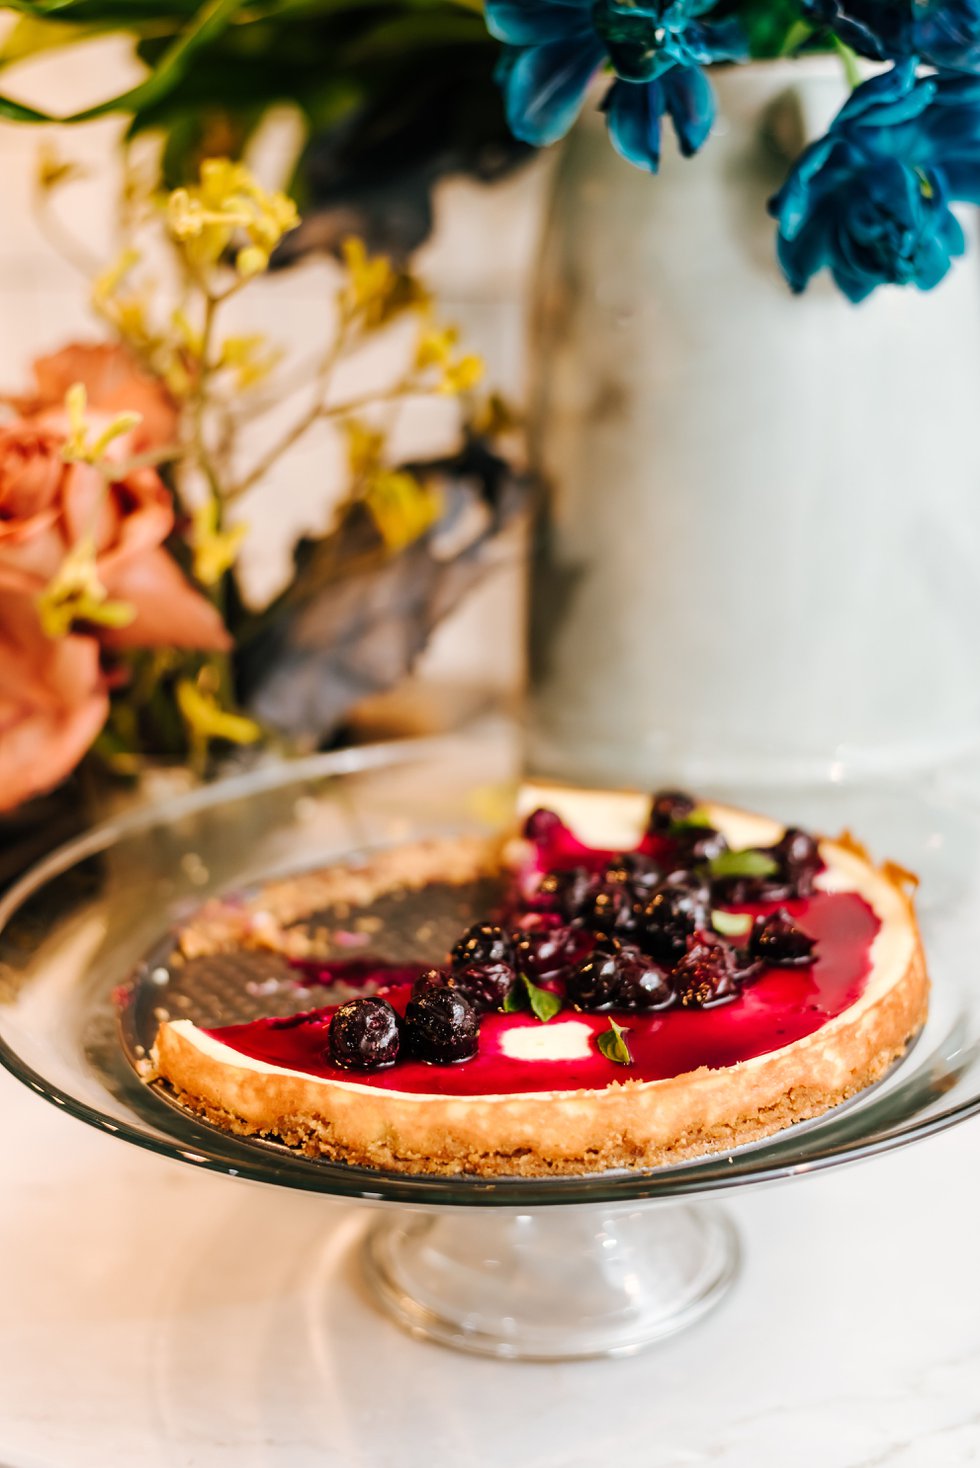 Cheesecake with Honeyed Blueberries 2 - photo credit Frames and Letters Photography.jpg